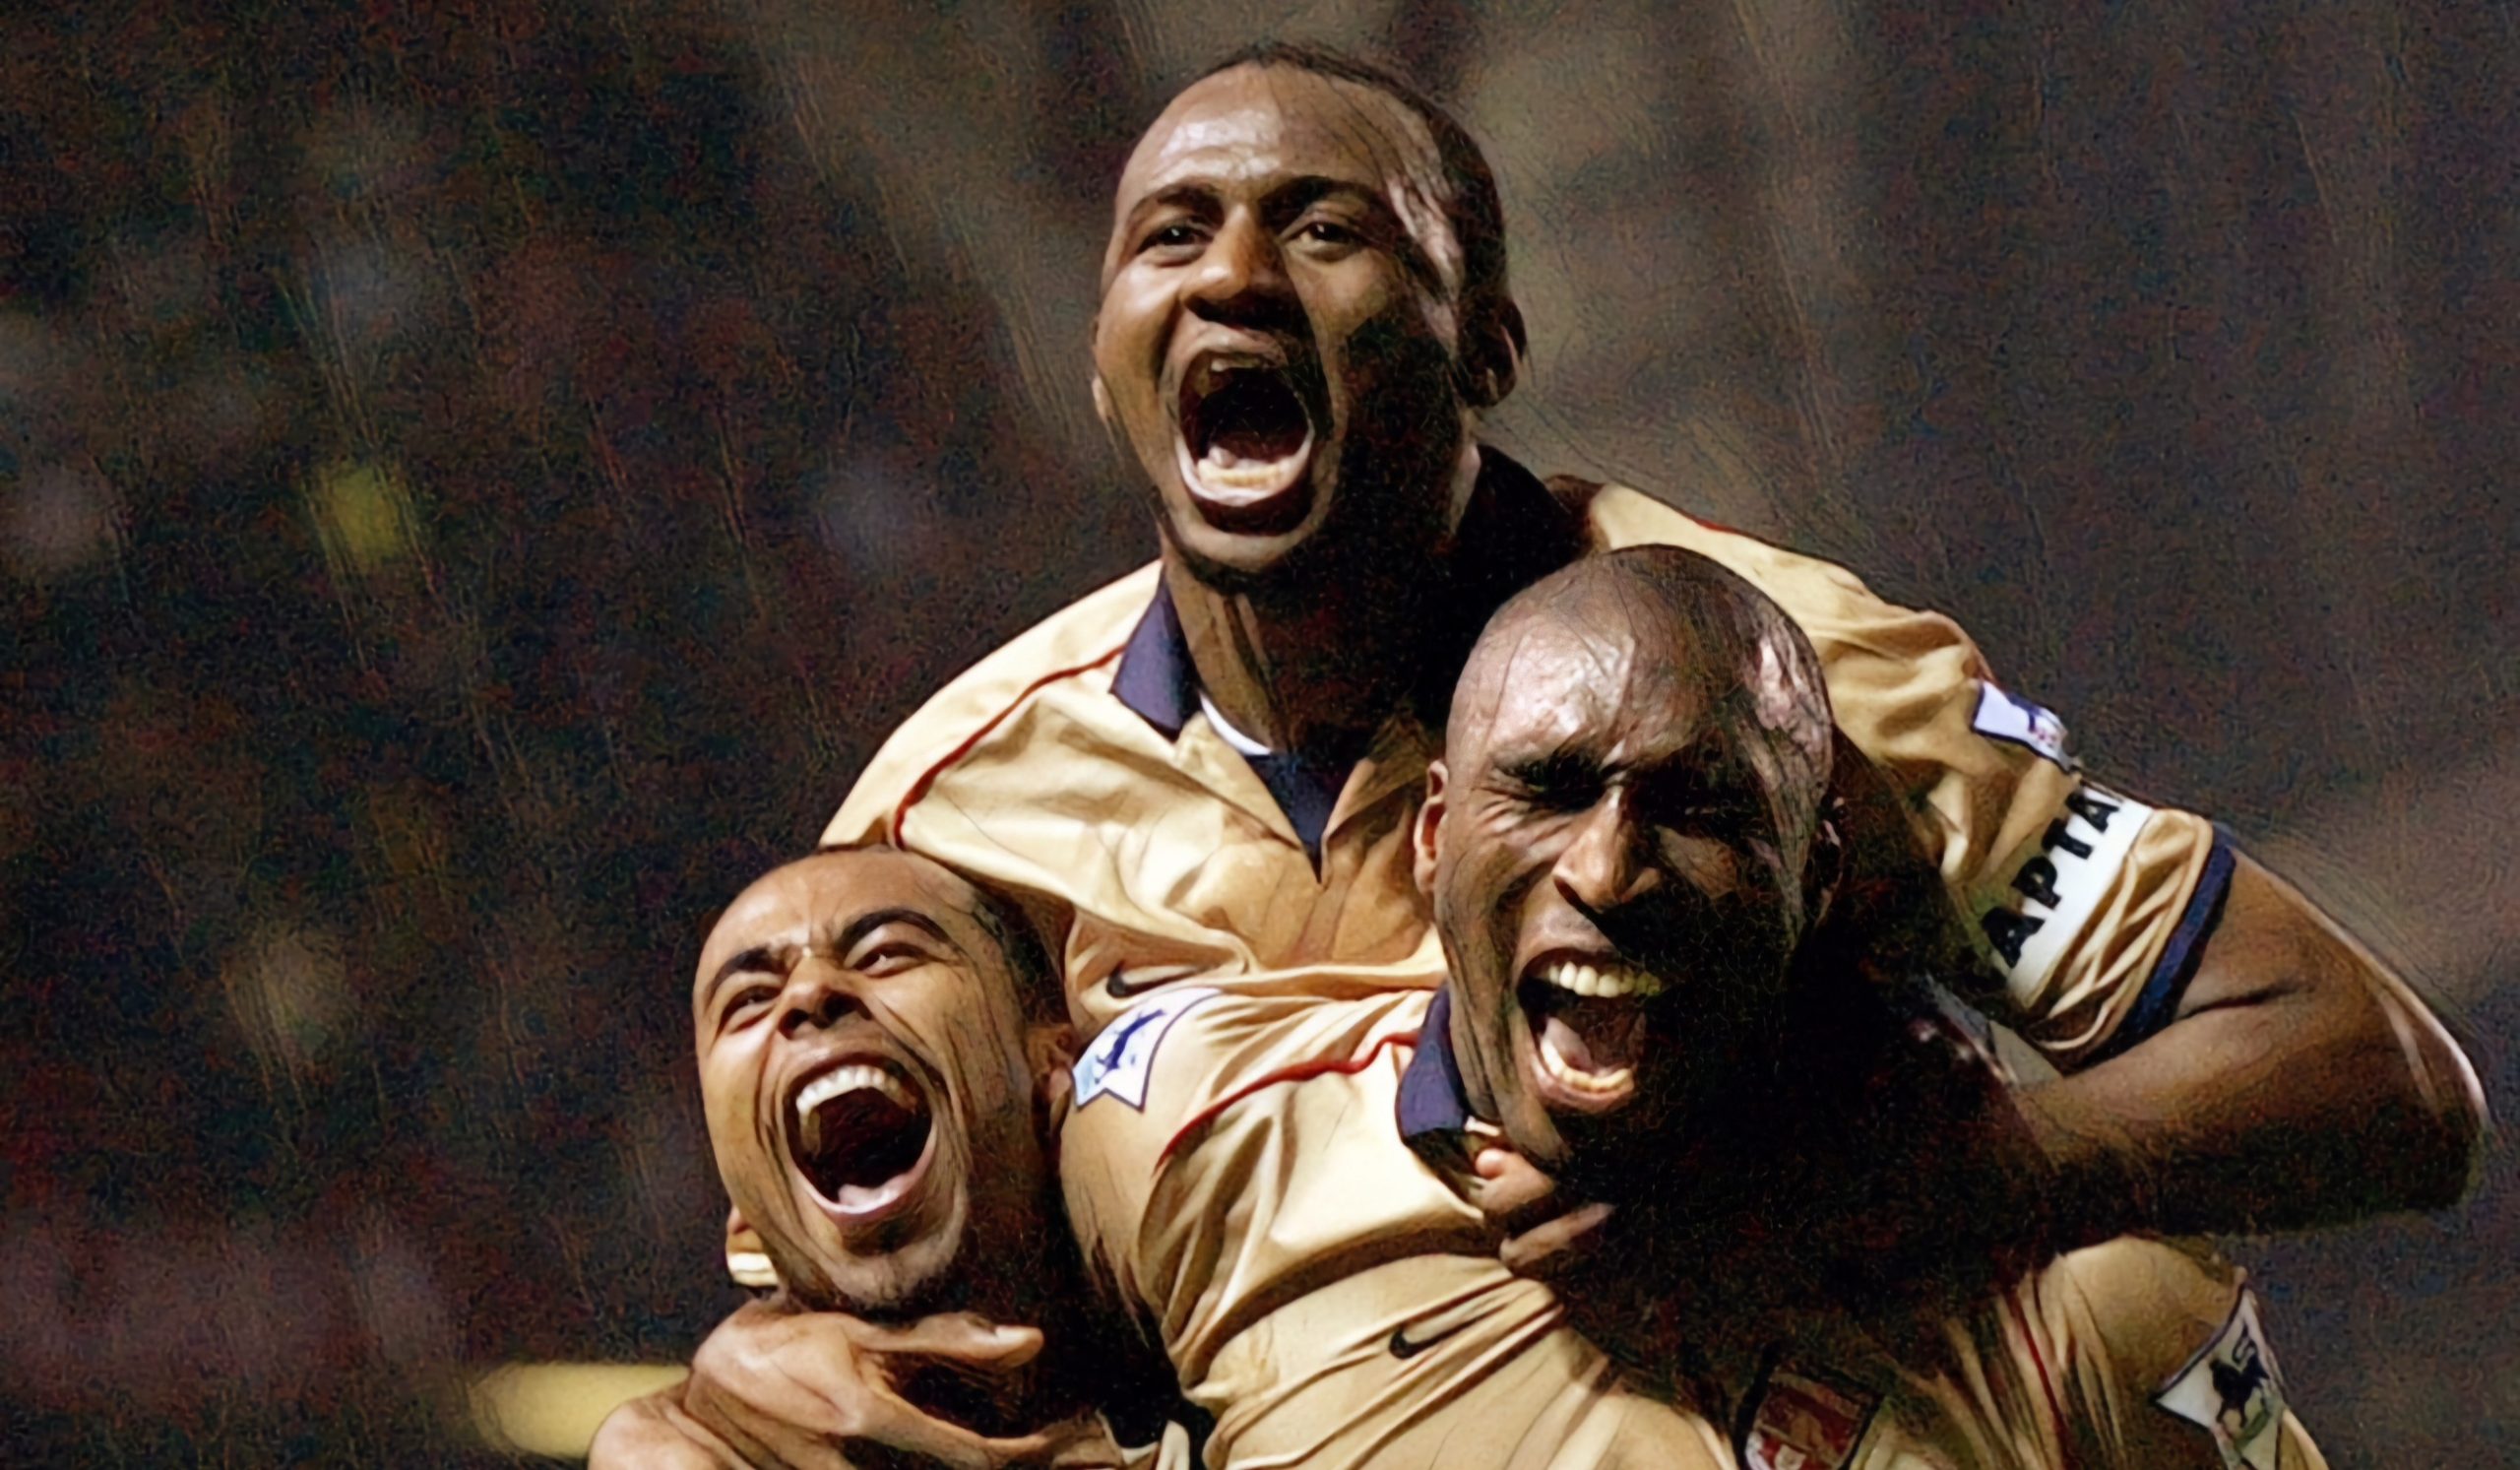 Arsenal players Ashley Cole, Patrick Vieira and Sol Campbell celebrate during the Premier League match between Manchester United and Arsenal played at Old Trafford, in Manchester, England on May 8, 2002. Arsenal won the match 1-0 to clinch the league title.